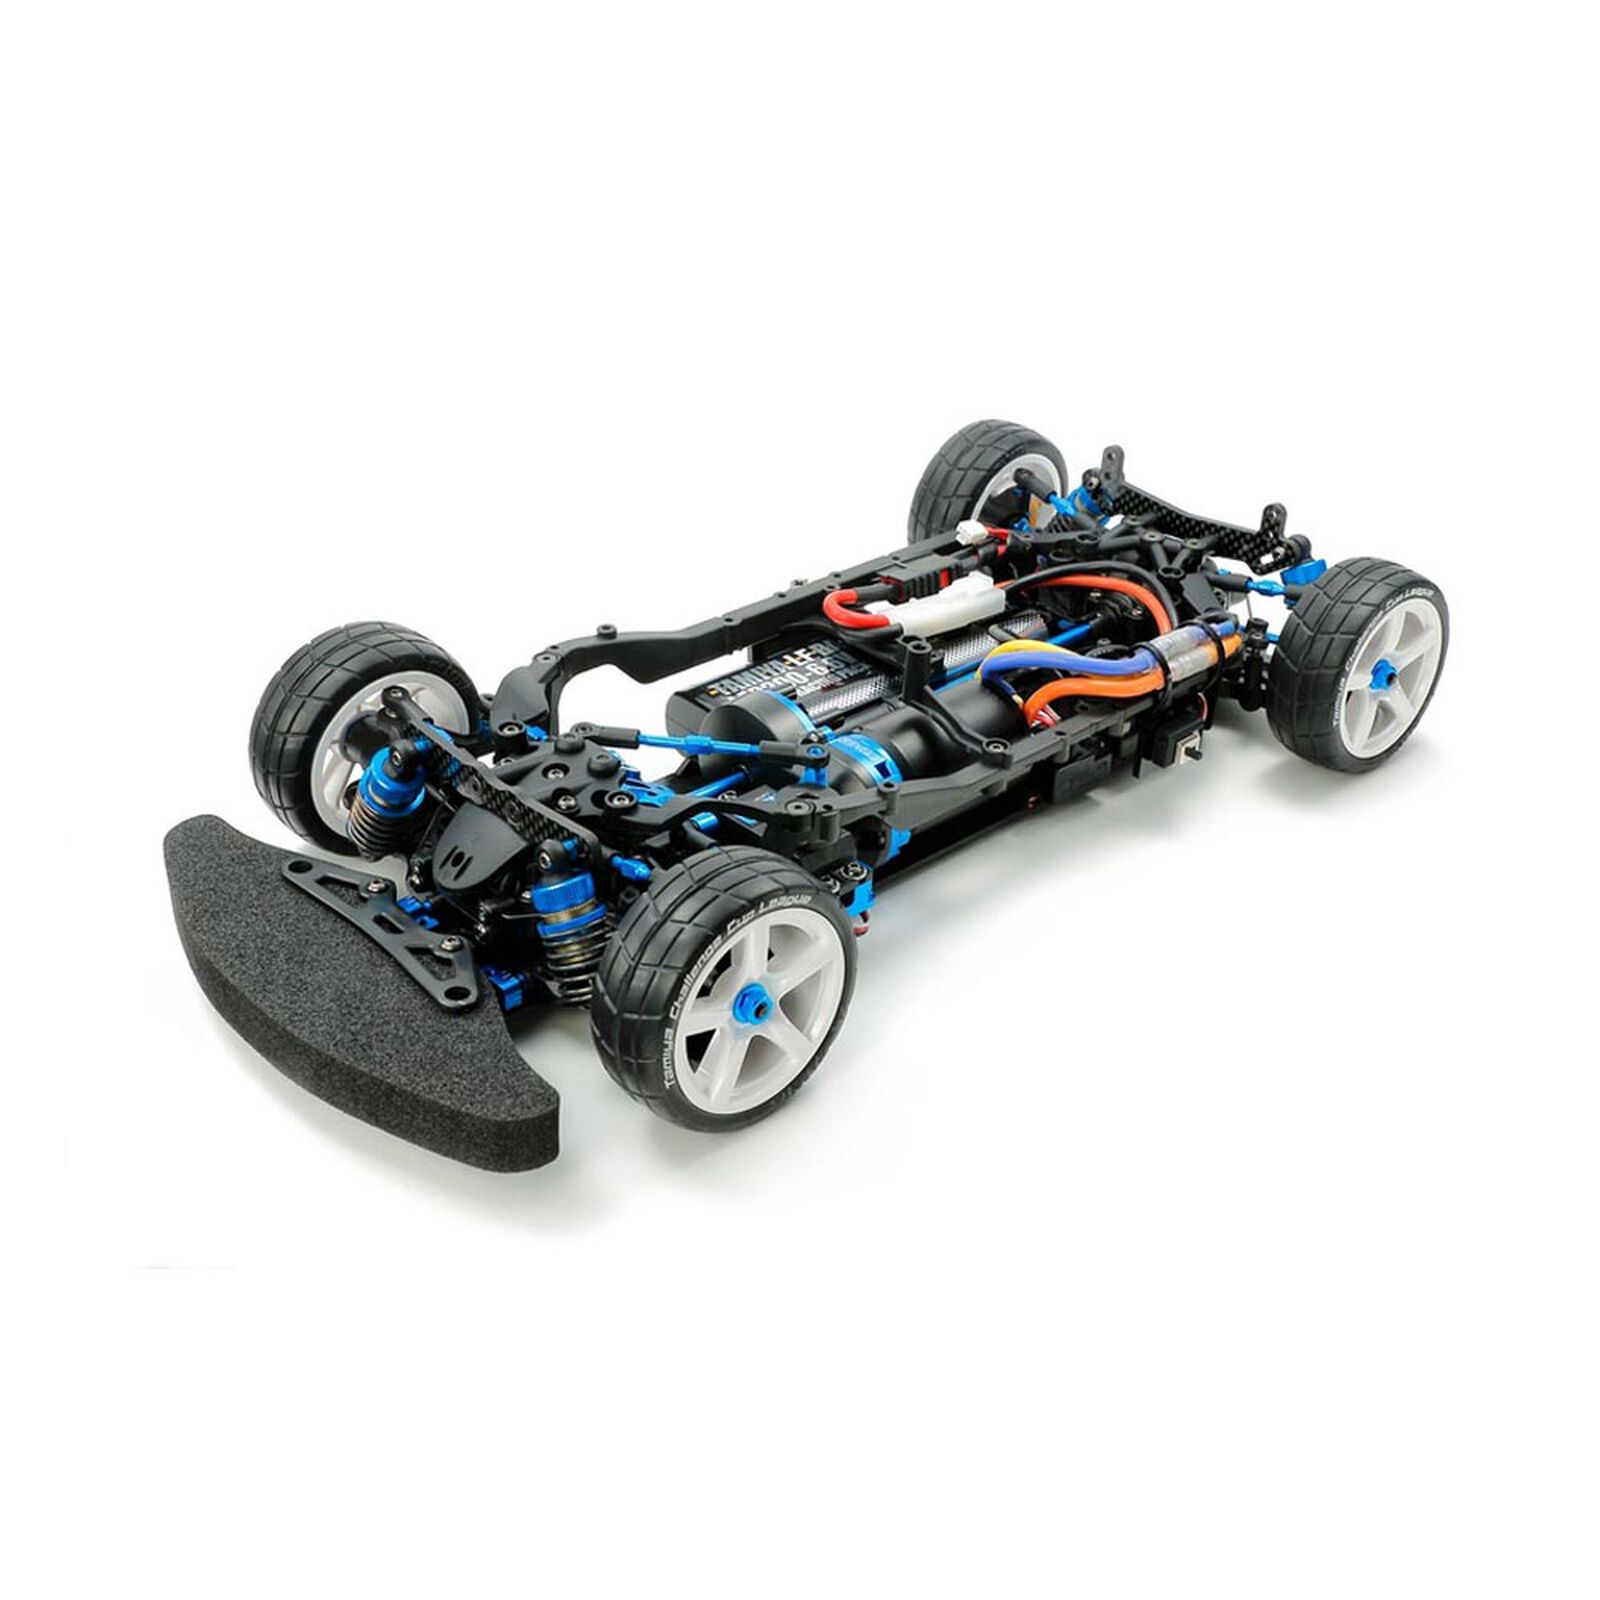 1/10 R/C TB-05R 4WD Chassis Kit